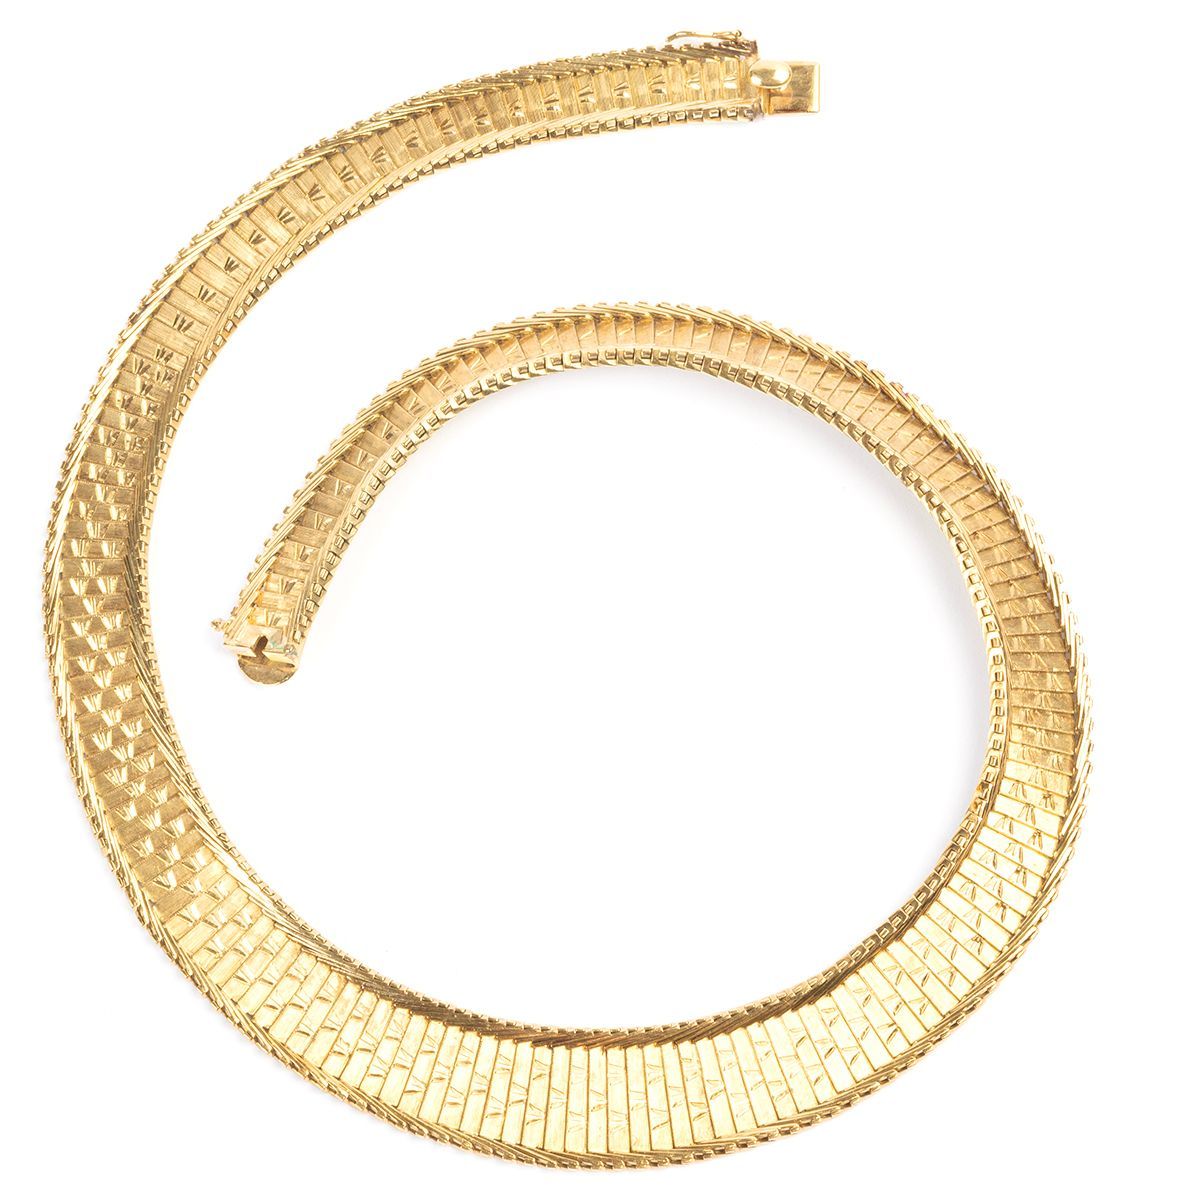 April Gallery Auction
Friday, April 19th | 10 a.m.
18k Yellow Gold Necklace.
Estimate: $2,500 / $3,500
#michaansauctions #auctions #michaans #galleryauction #jewelry #gold #necklace #goldnecklace #yellowgold #yellowgoldnecklace #18kgold